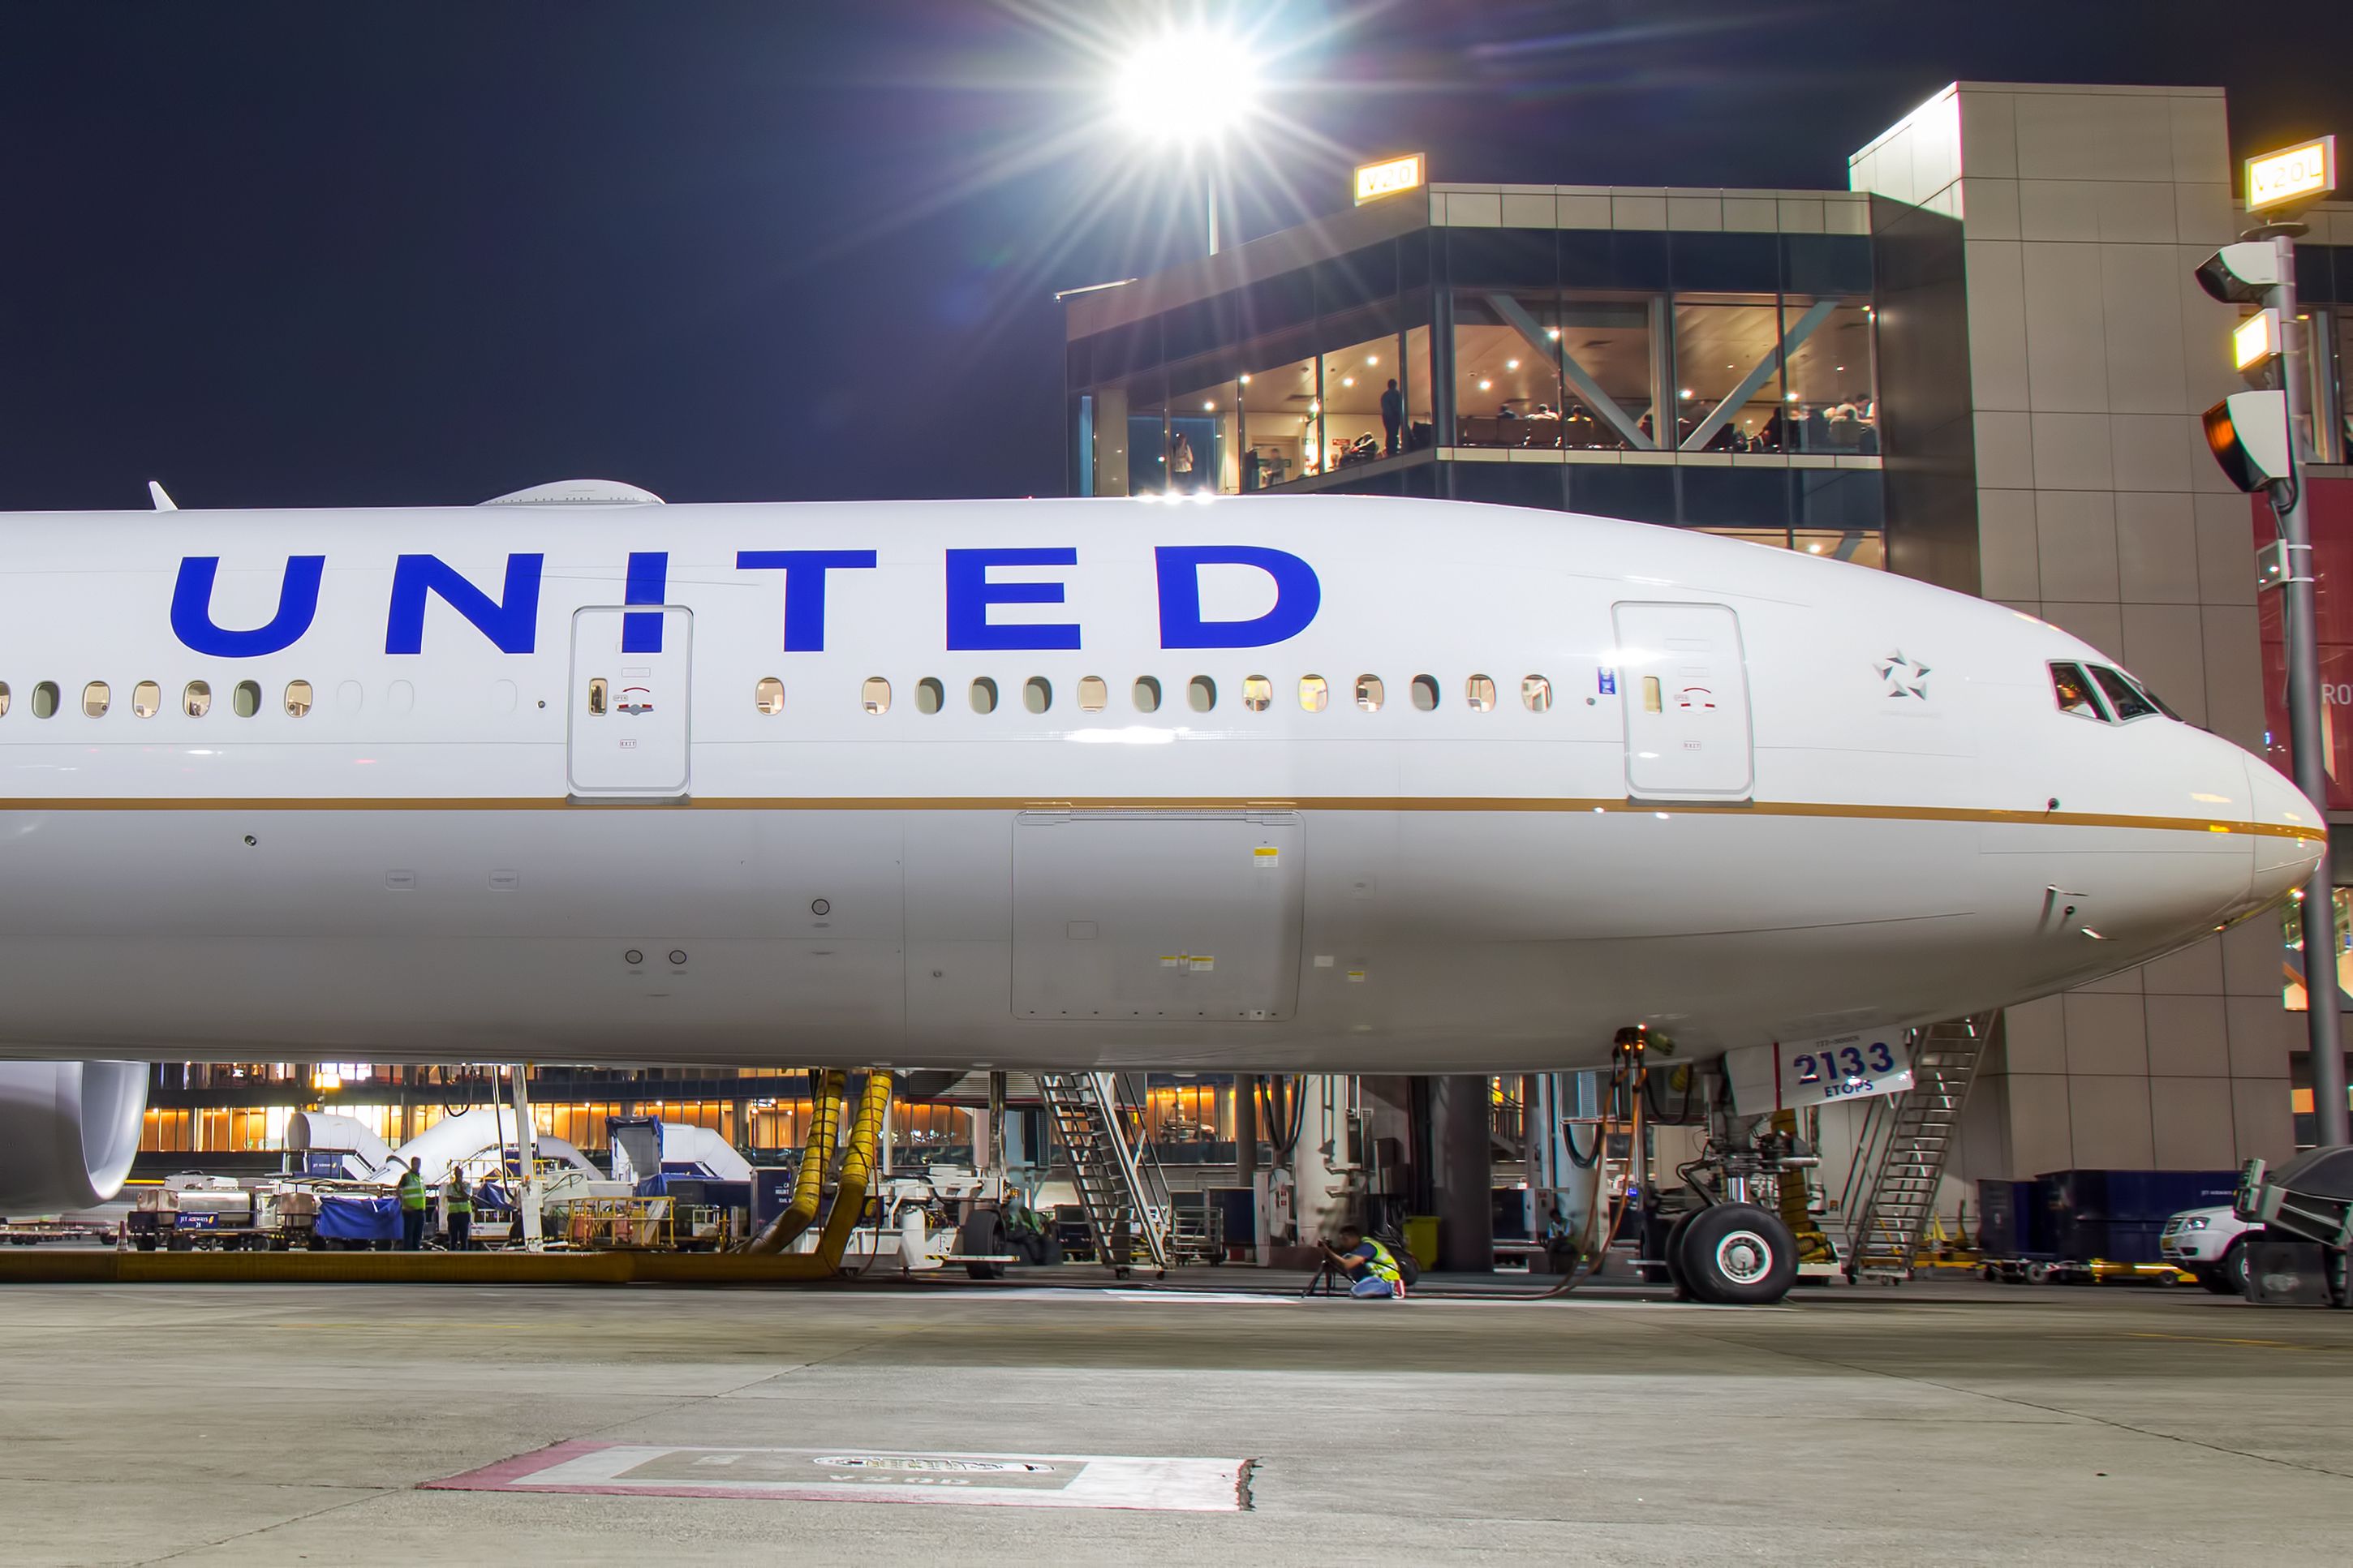 United Airlines Boeing 777 parked at the airport